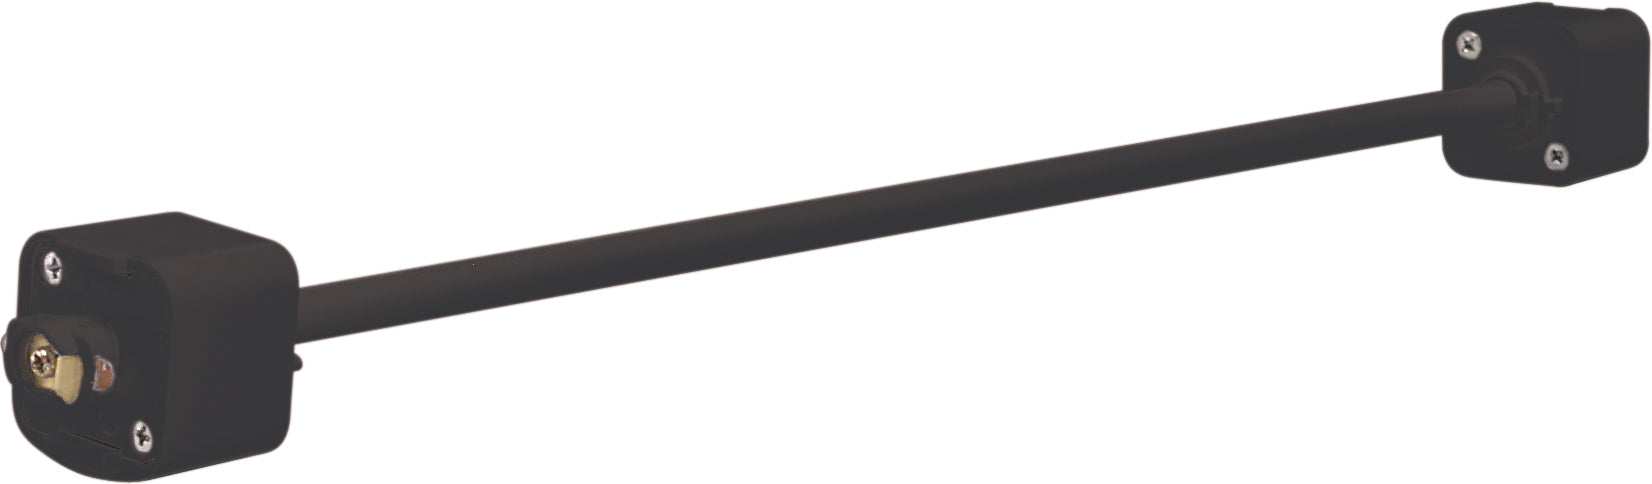 SATCO/NUVO 18 Inch Extension Wand Black Finish (TP163)